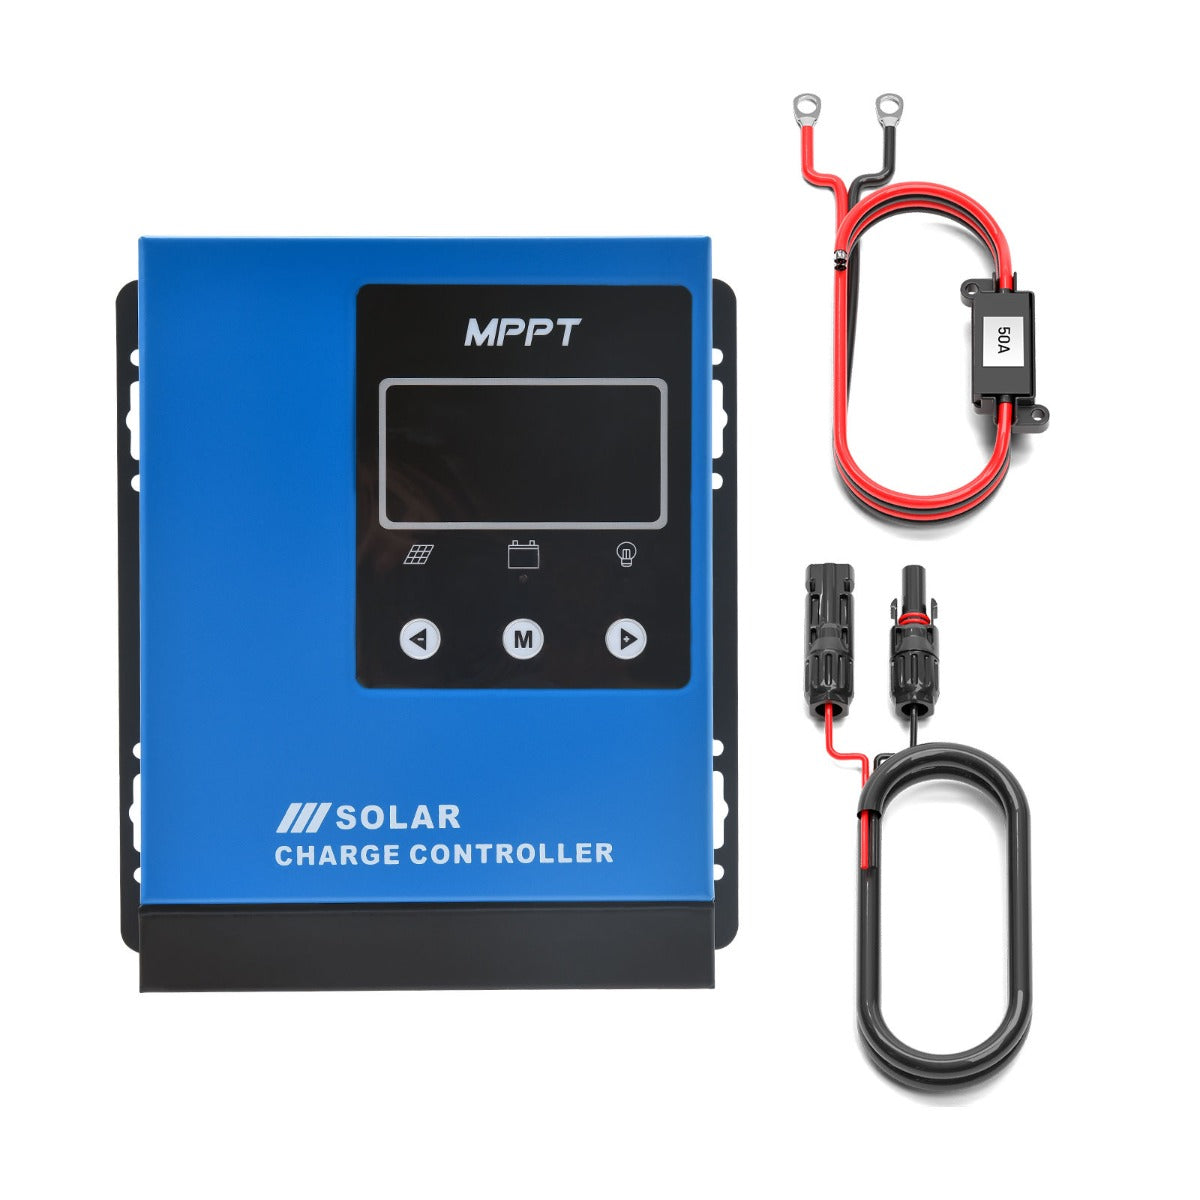 BUNDLE DEAL - VoltX 2x 200Ah Lithium Battery + 360W Solar Panel + 40A MPPT Controller with Cable